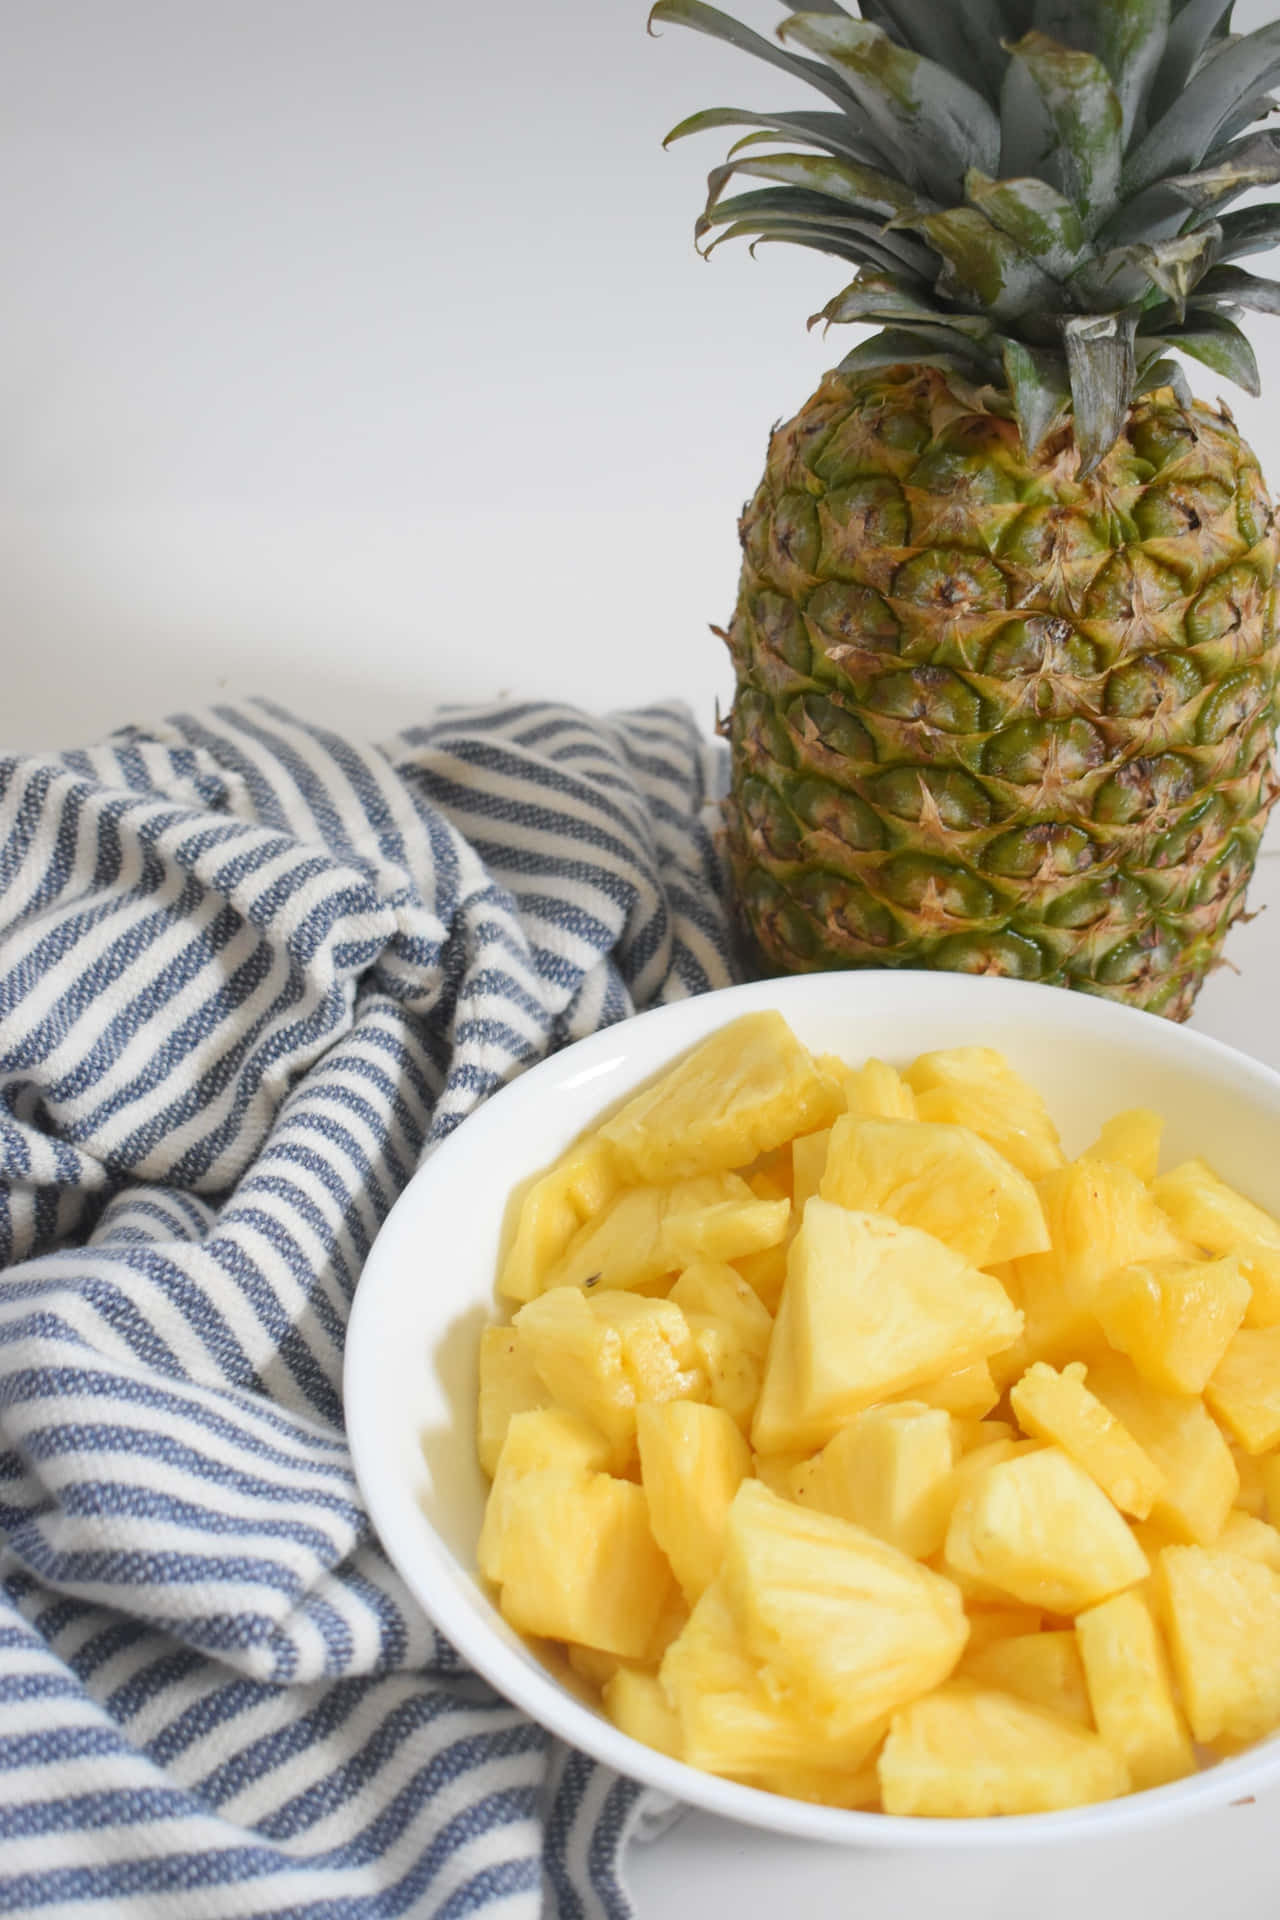 A fresh and delicious pineapple, ready to be enjoyed!